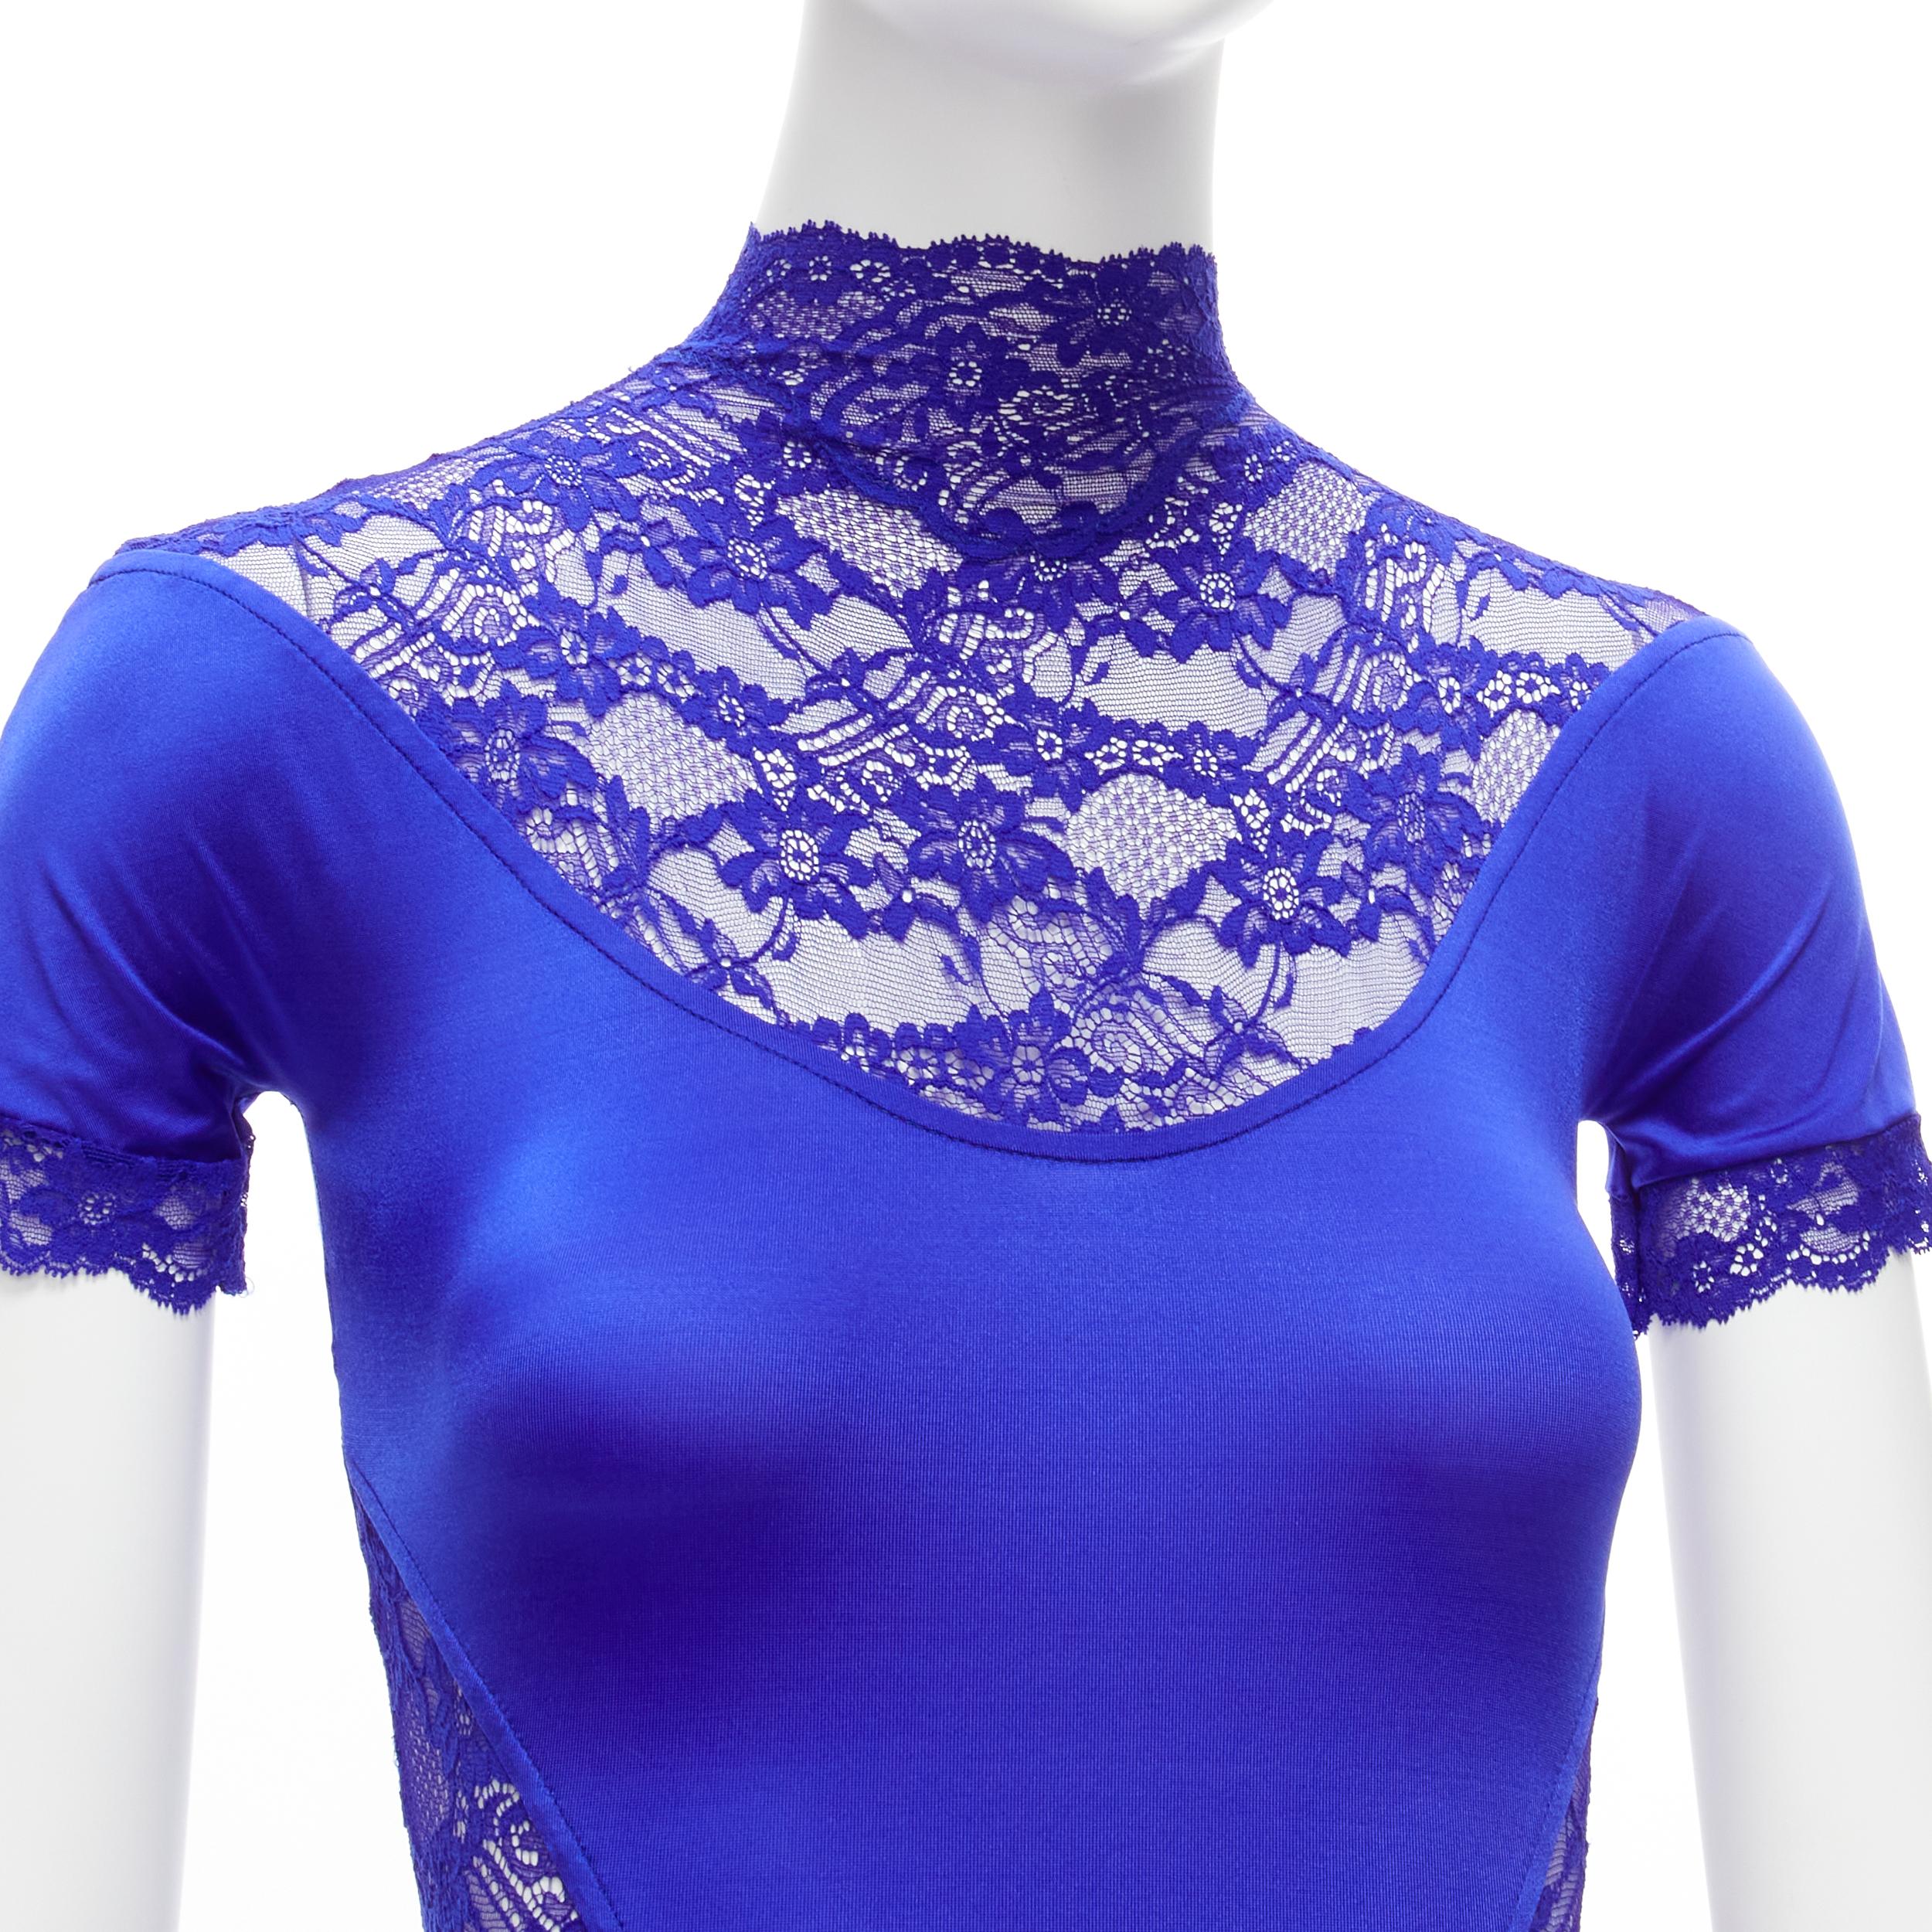 GIANNI VERSACE Vintage blue lace satin panels blue crystal body suit top
Reference: TGAS/D00361
Brand: Gianni Versace
Designer: Gianni Versace
Material: Feels like polyester
Color: Blue
Pattern: Lace
Closure: Snap Buttons
Extra Details: Blue crystal